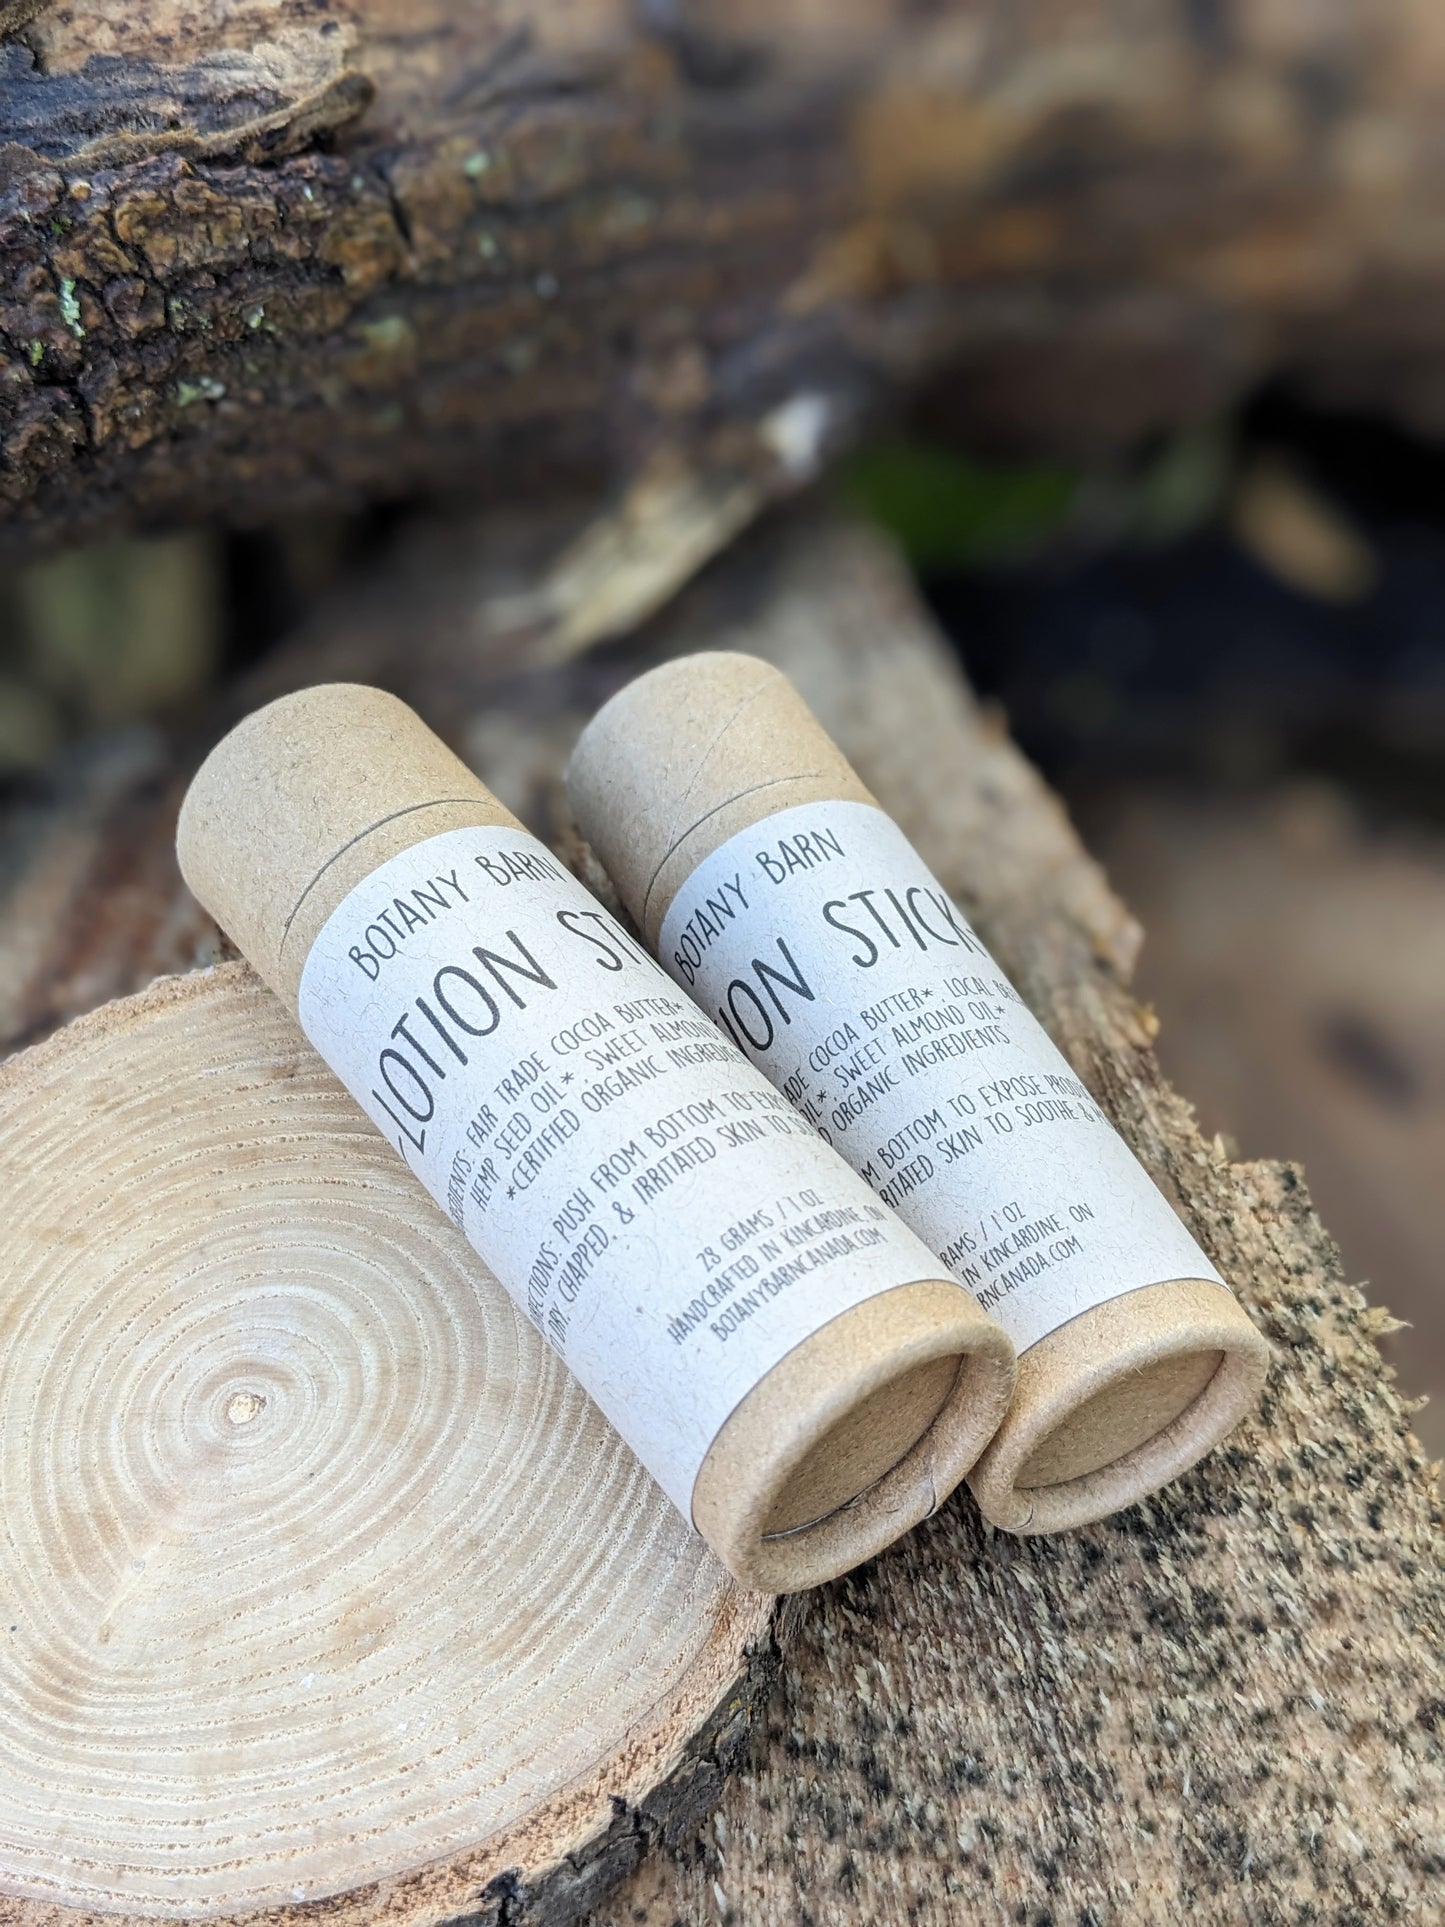 Lotion Stick - Eco Friendly Solid Lotion made with Organic Cocoa Butter & Hemp Oil